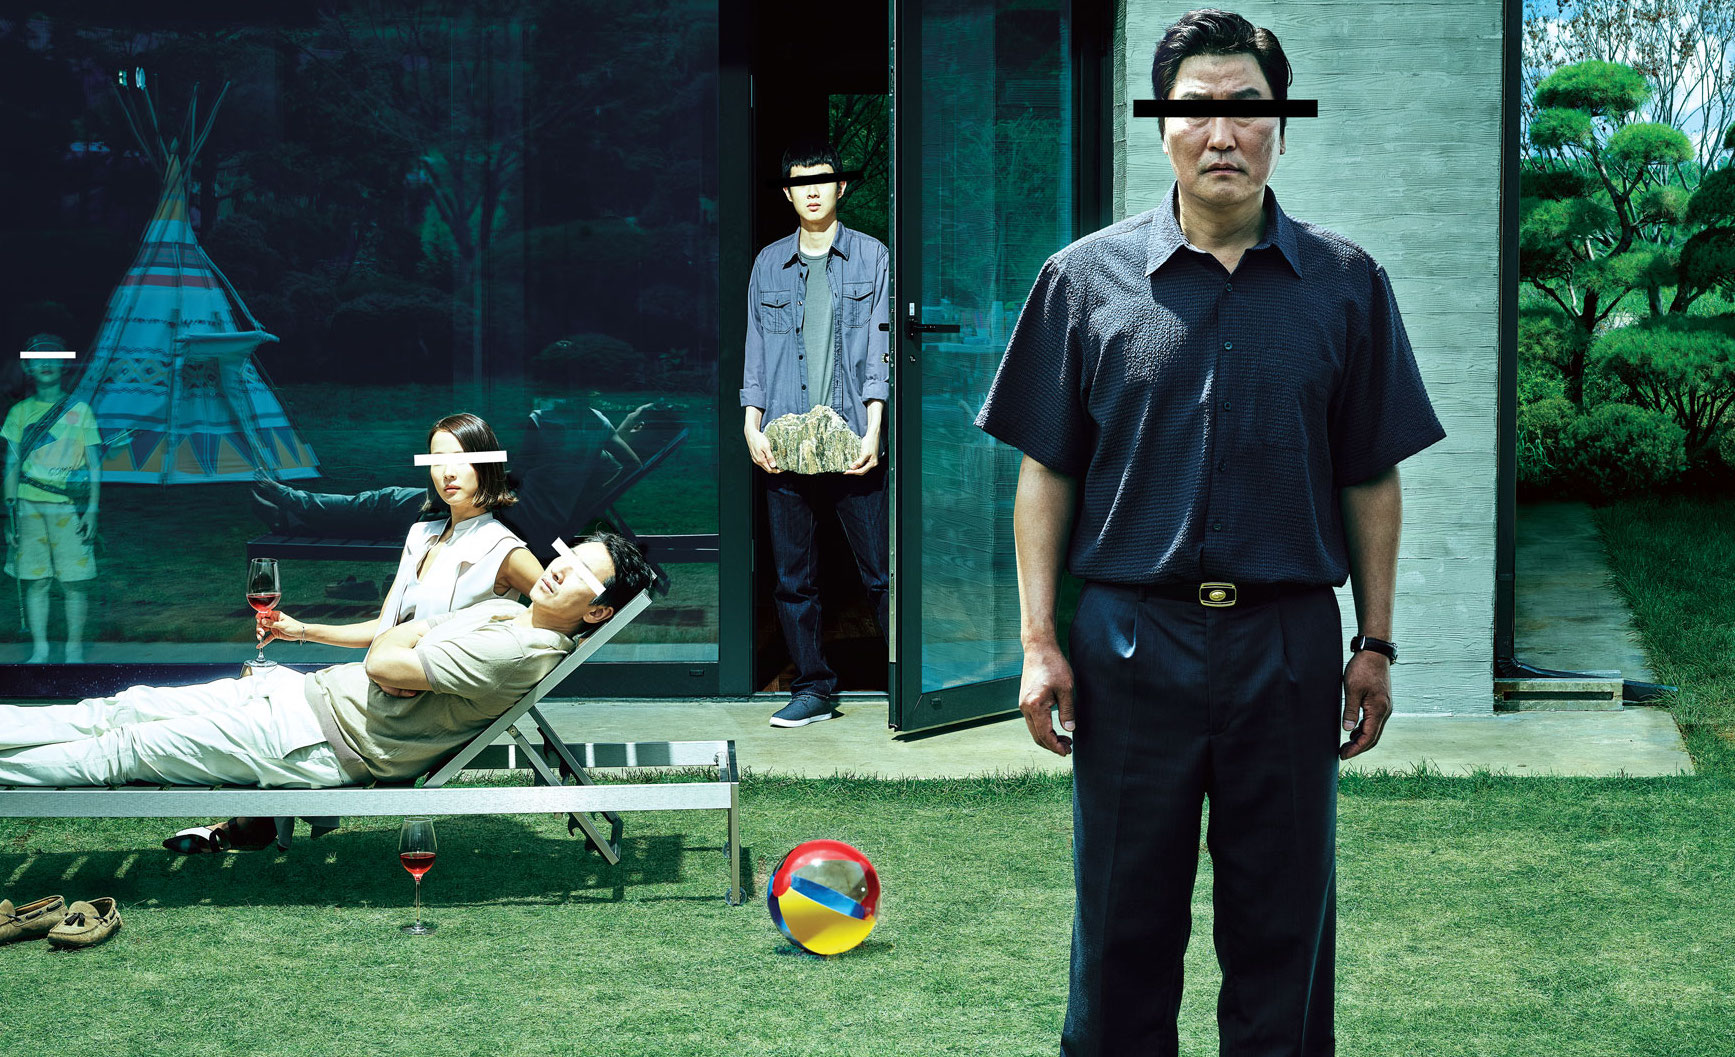 A promotion image for "Parasite", with five different characters looking at the viewer with their faces censored.